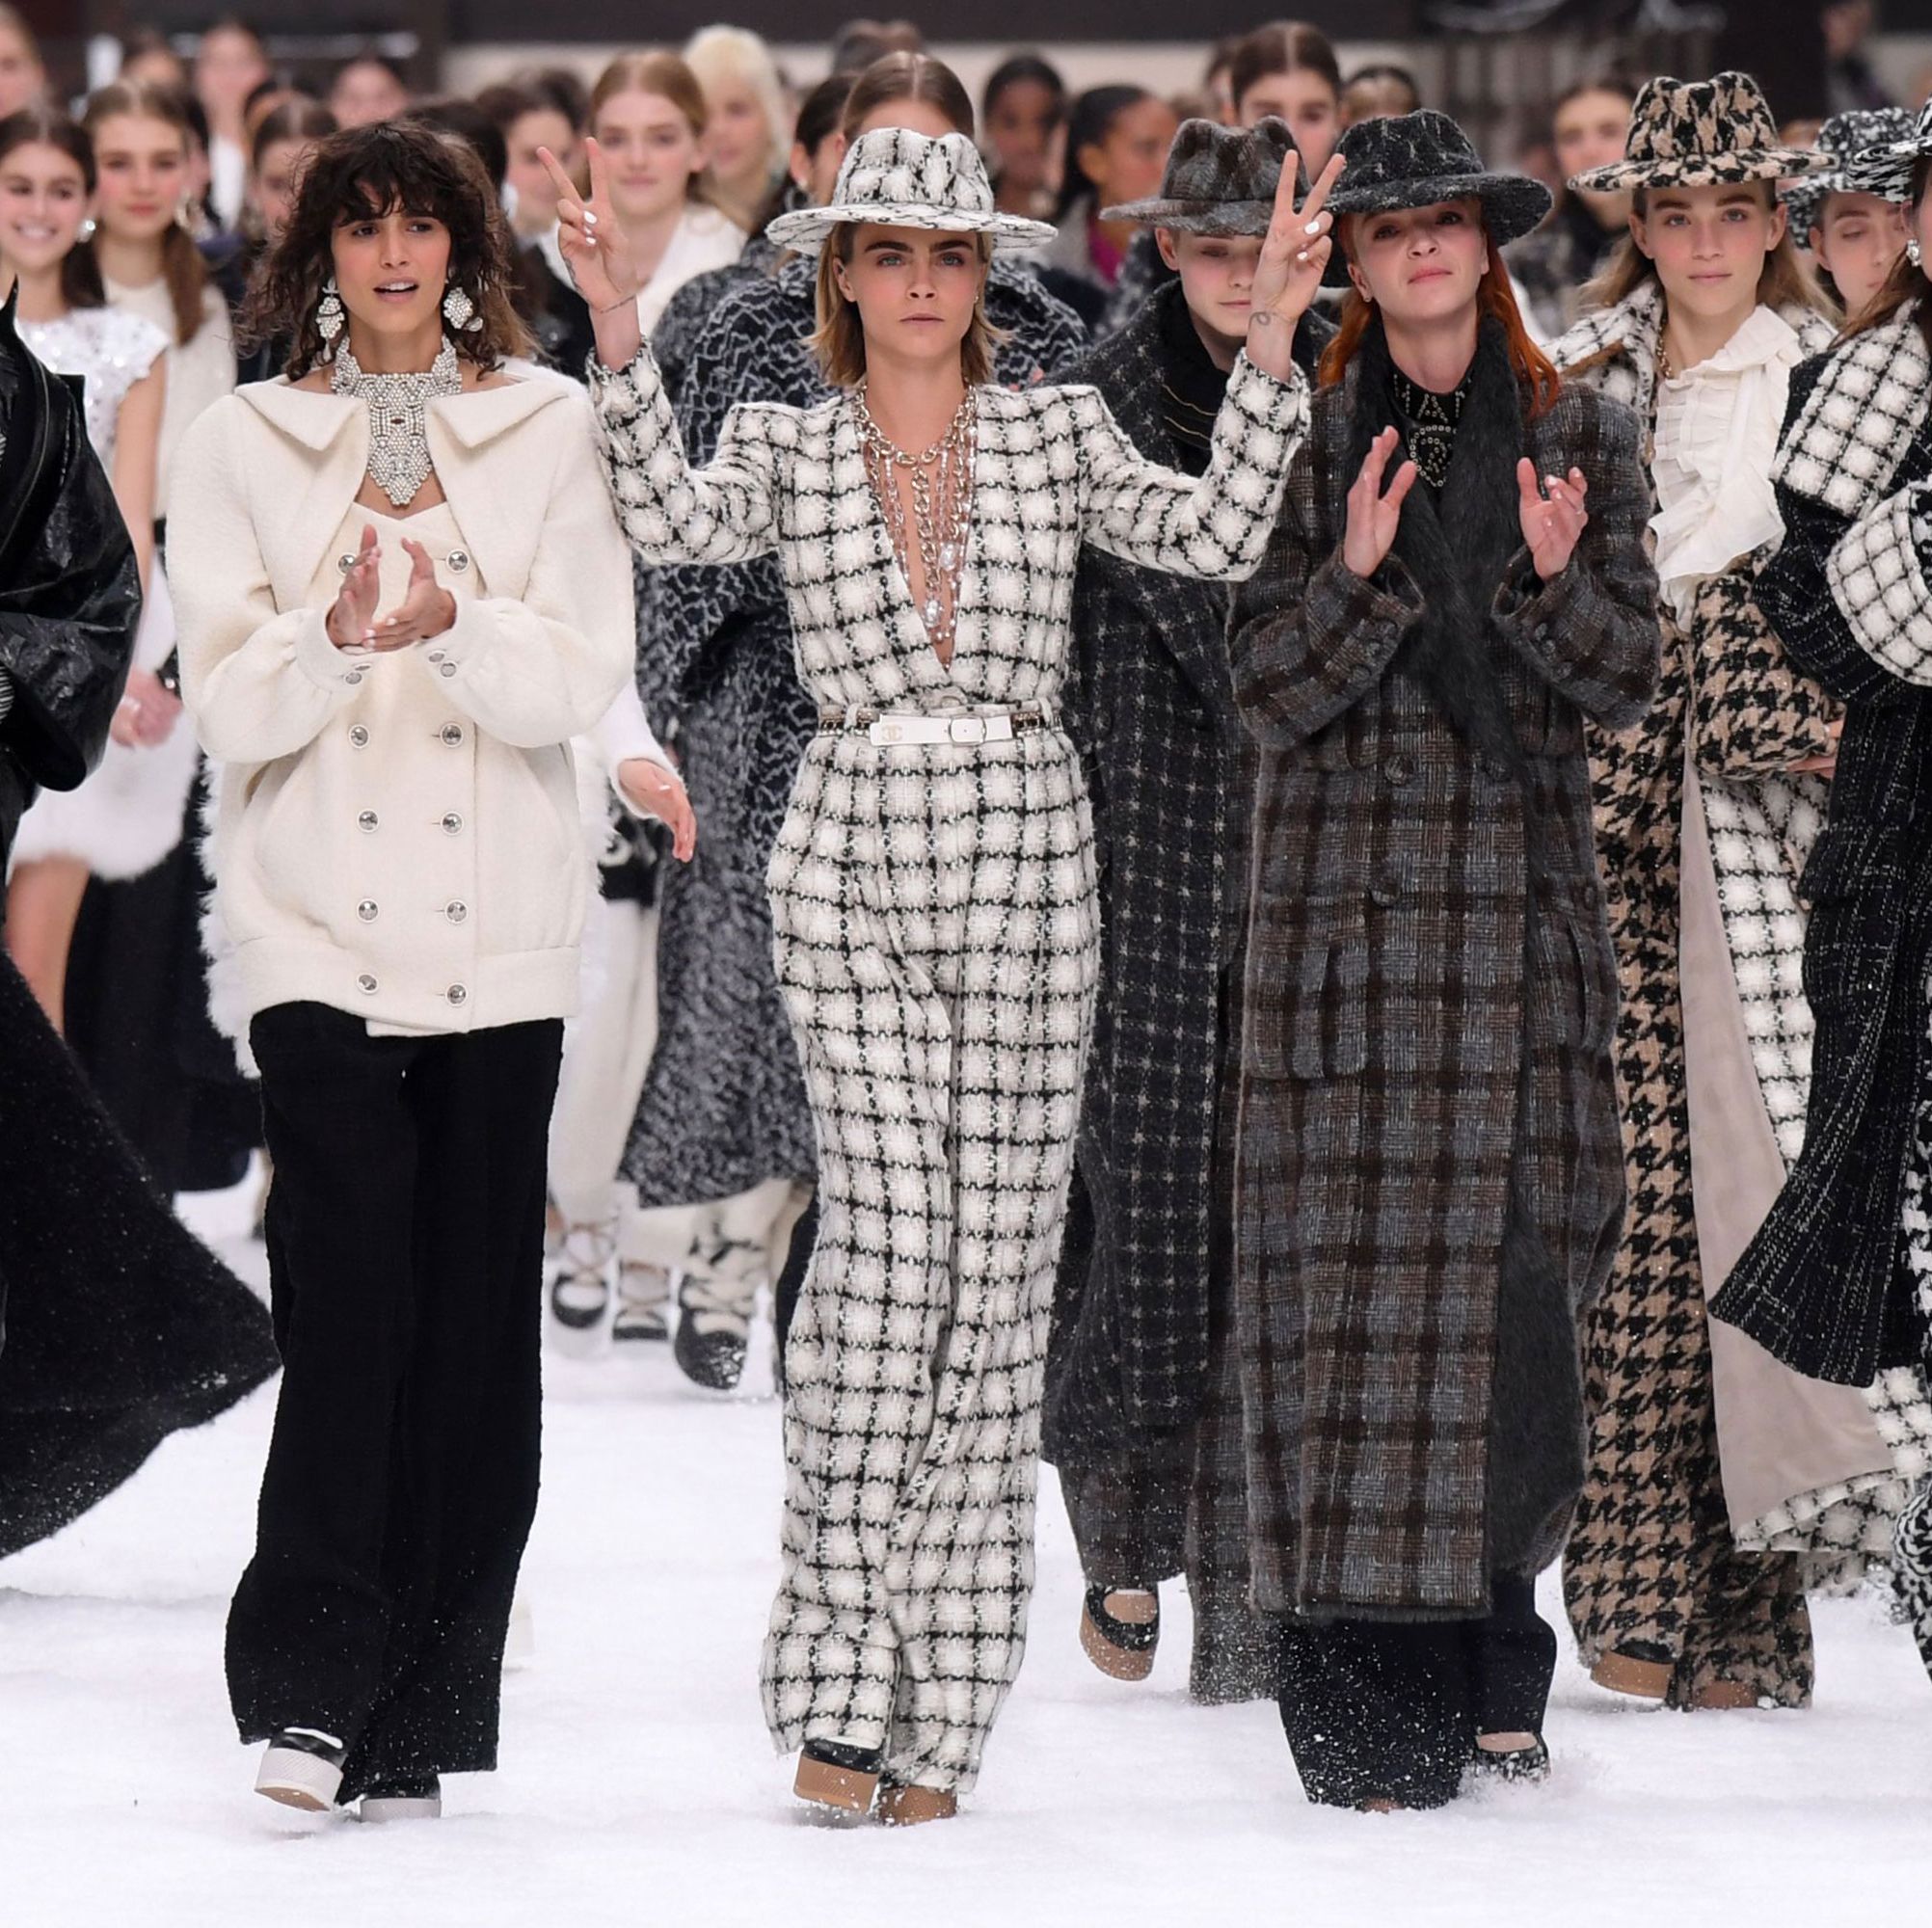 Chanel made £9 billion in Lagerfeld's last year at the fashion house